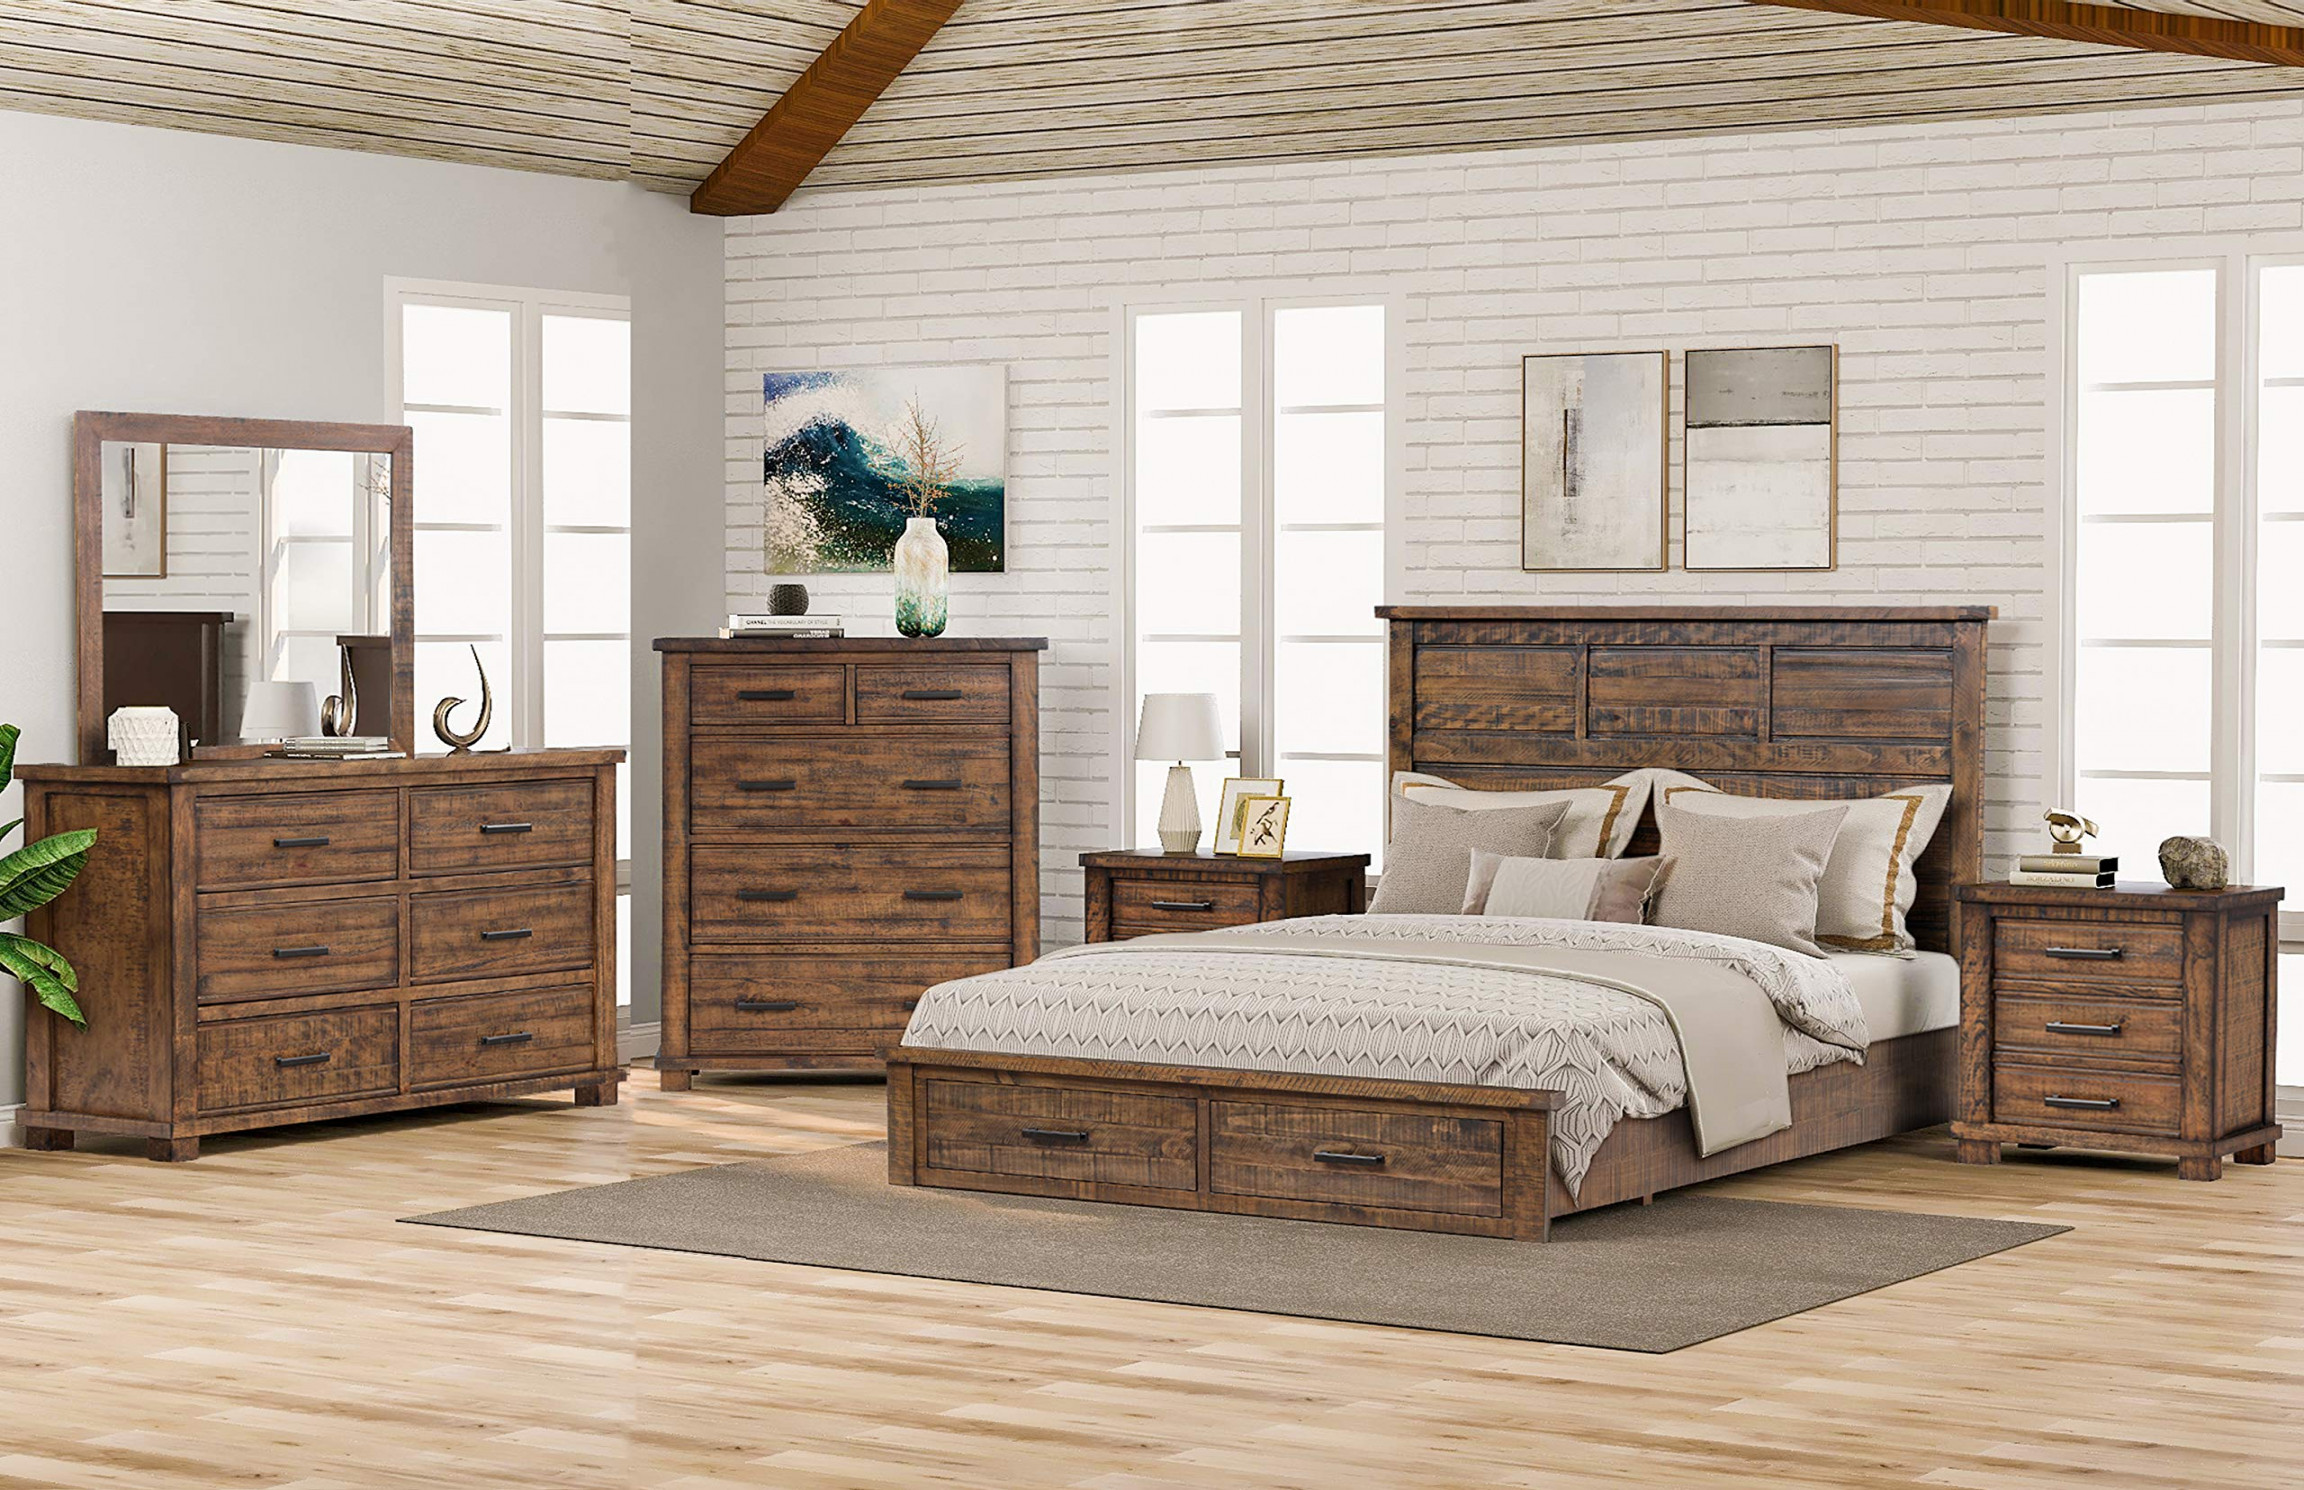 SOFTSEA Farmhouse -Piece Bedroom Furniture Sets, Wood Queen Bedroom  Furniture Set Include Solid Pine Wood Storage Bed,  Nightstands, -Drawer